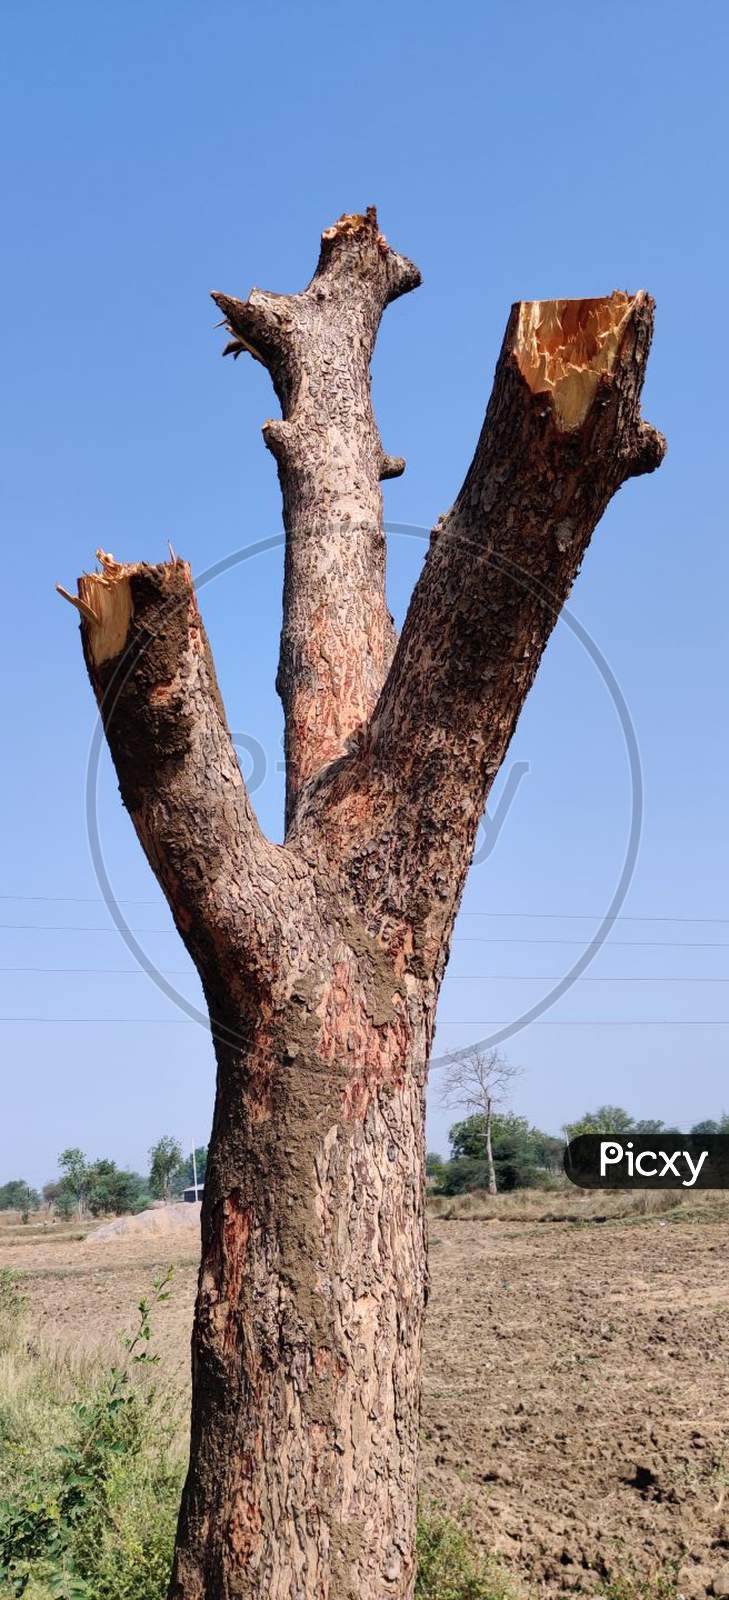 Half Cutting Wood Of Tree In Countryside Area Under Blue Sky